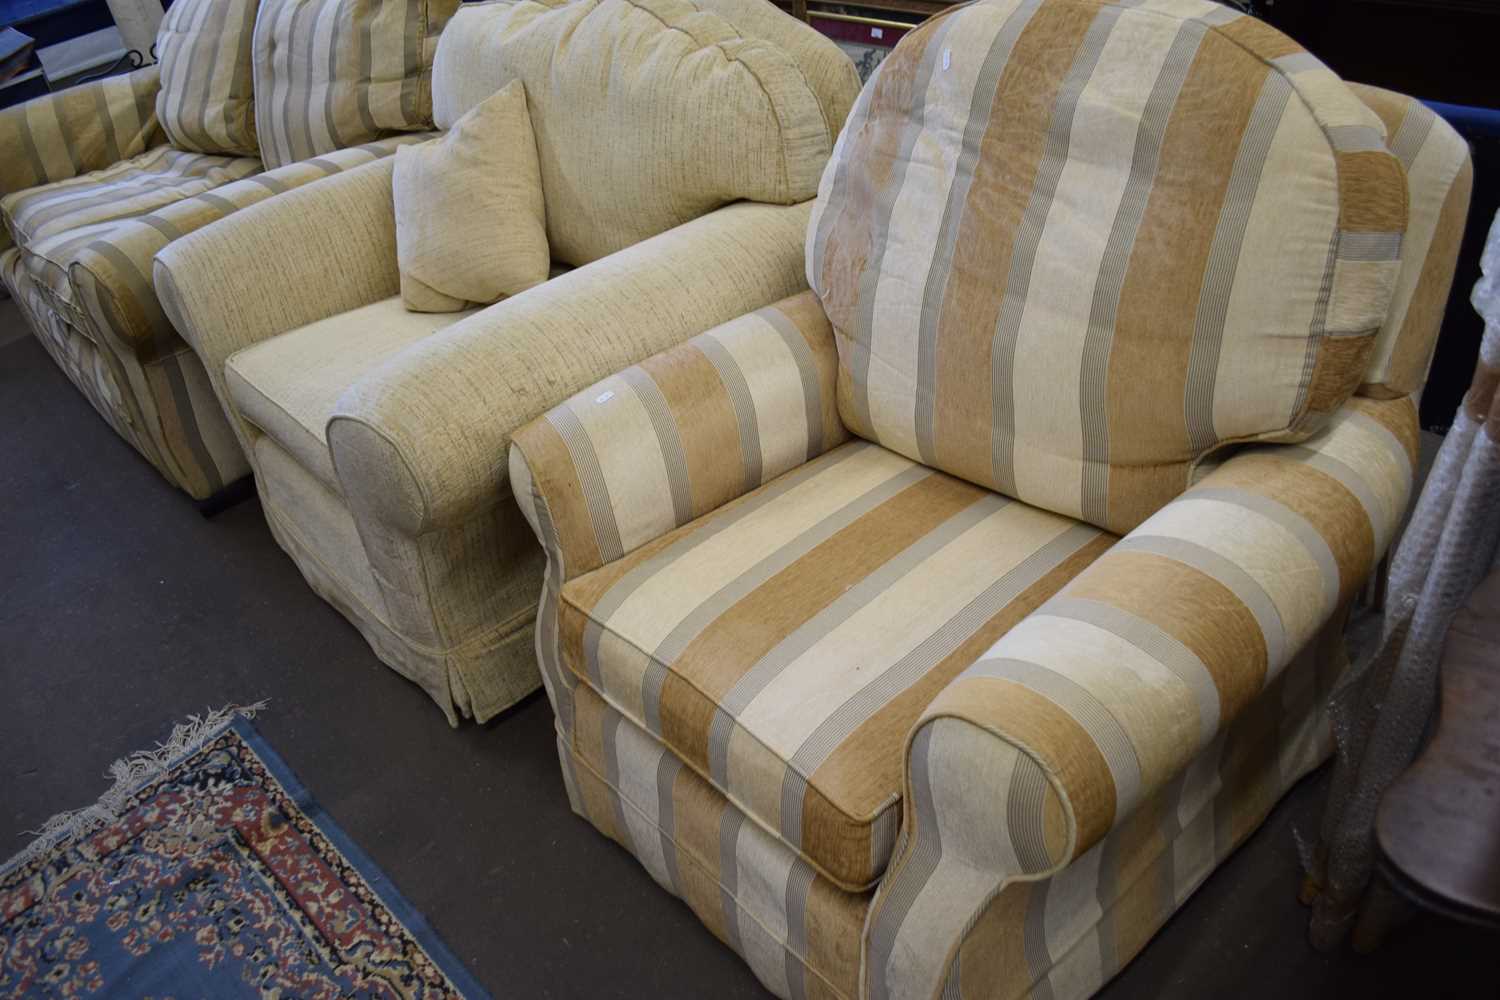 TWO-SEATER SOFA TOGETHER WITH A MATCHING ARMCHAIR AND A FURTHER PALE UPHOLSTERED ARMCHAIR (3) - Image 2 of 2